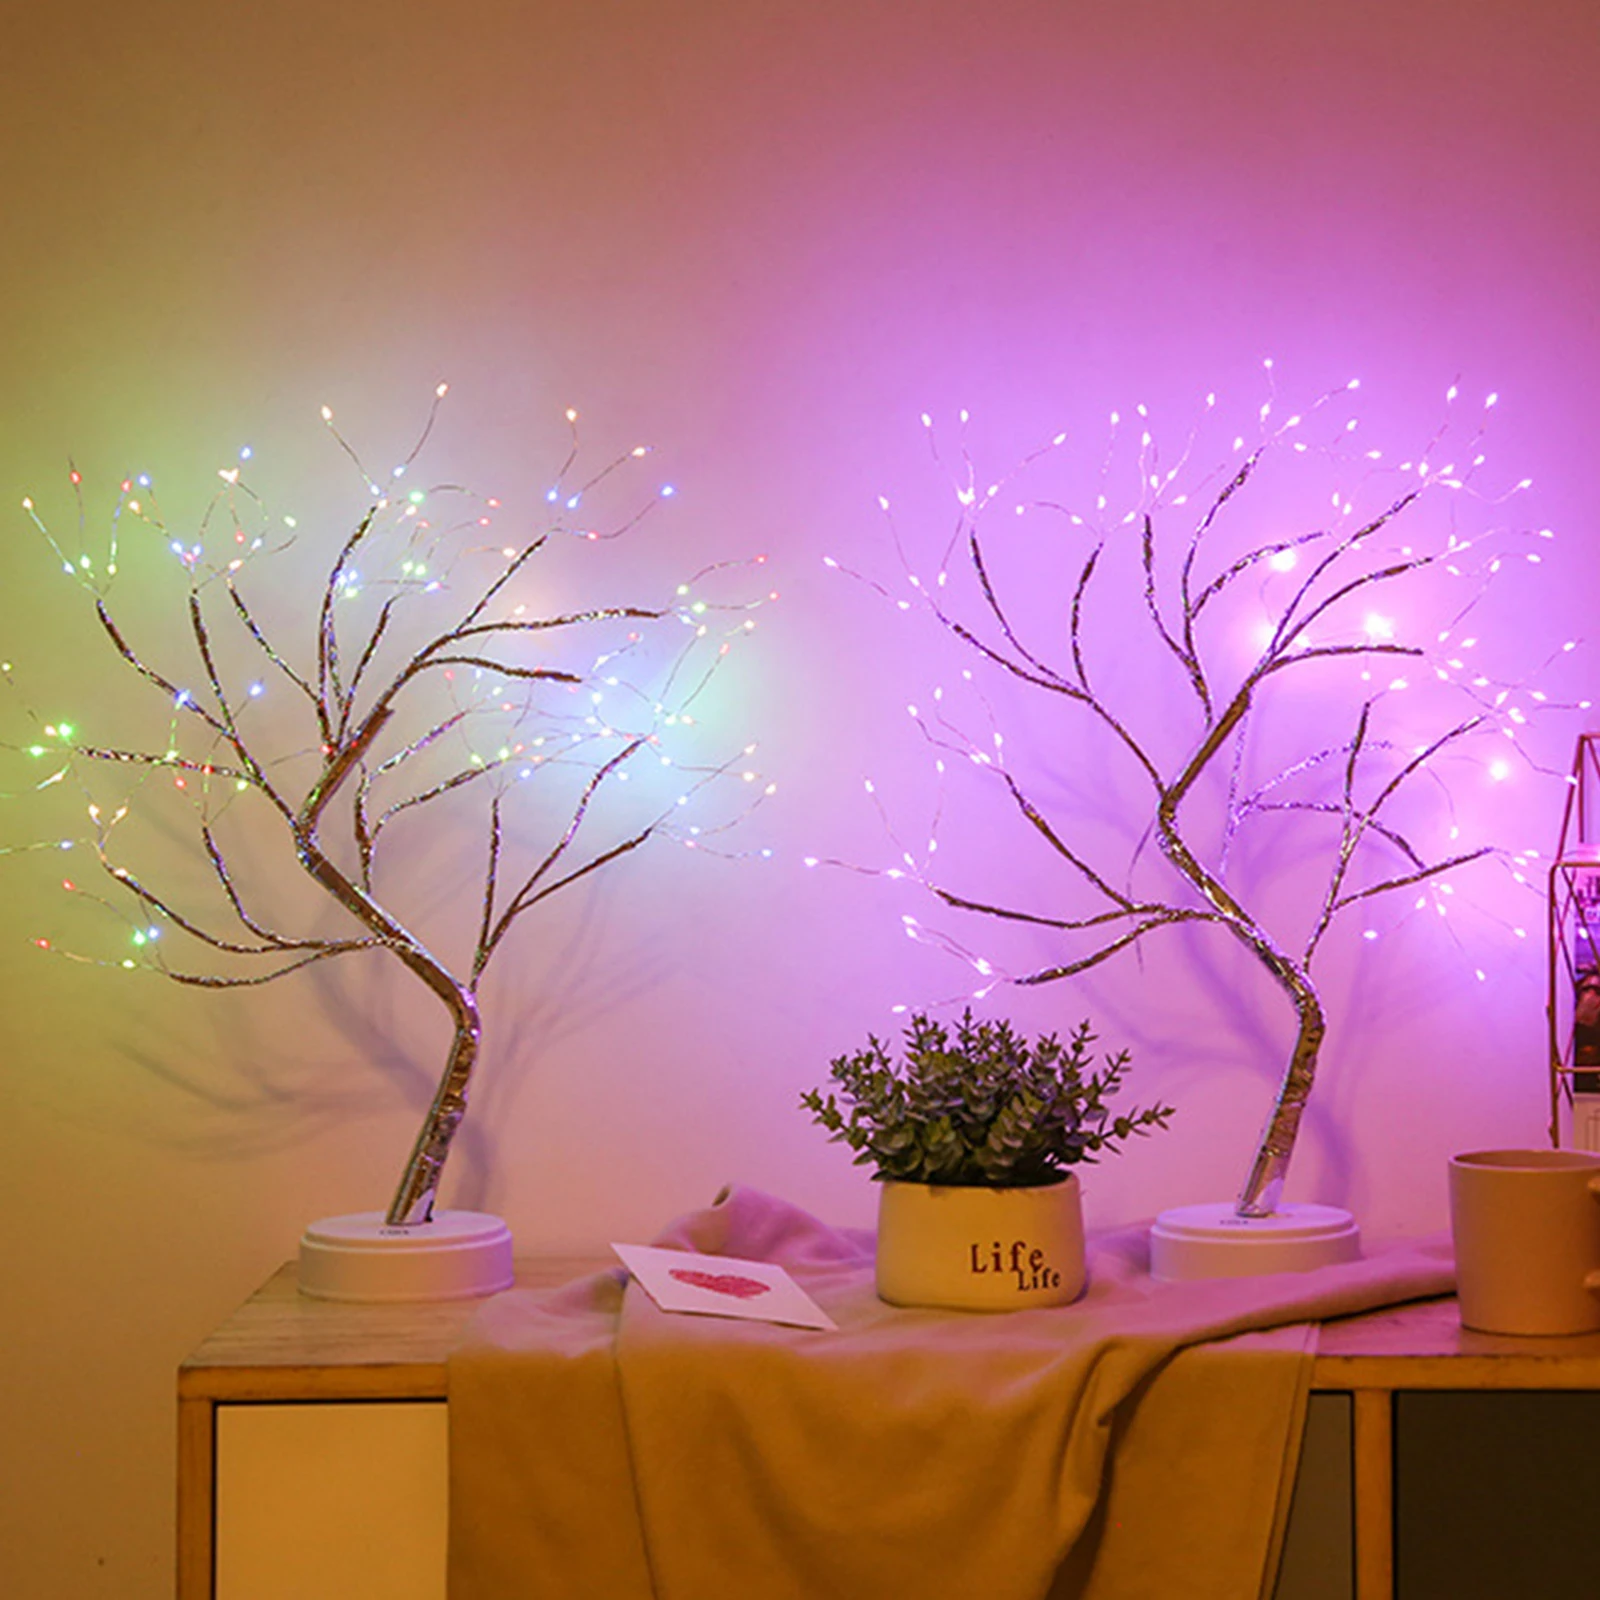 

108 LED Tabletop Bonsai Tree Light Waterproof Touch Switch Copper Wire Branch Light for Desktop Party Wedding Decoration Lamp